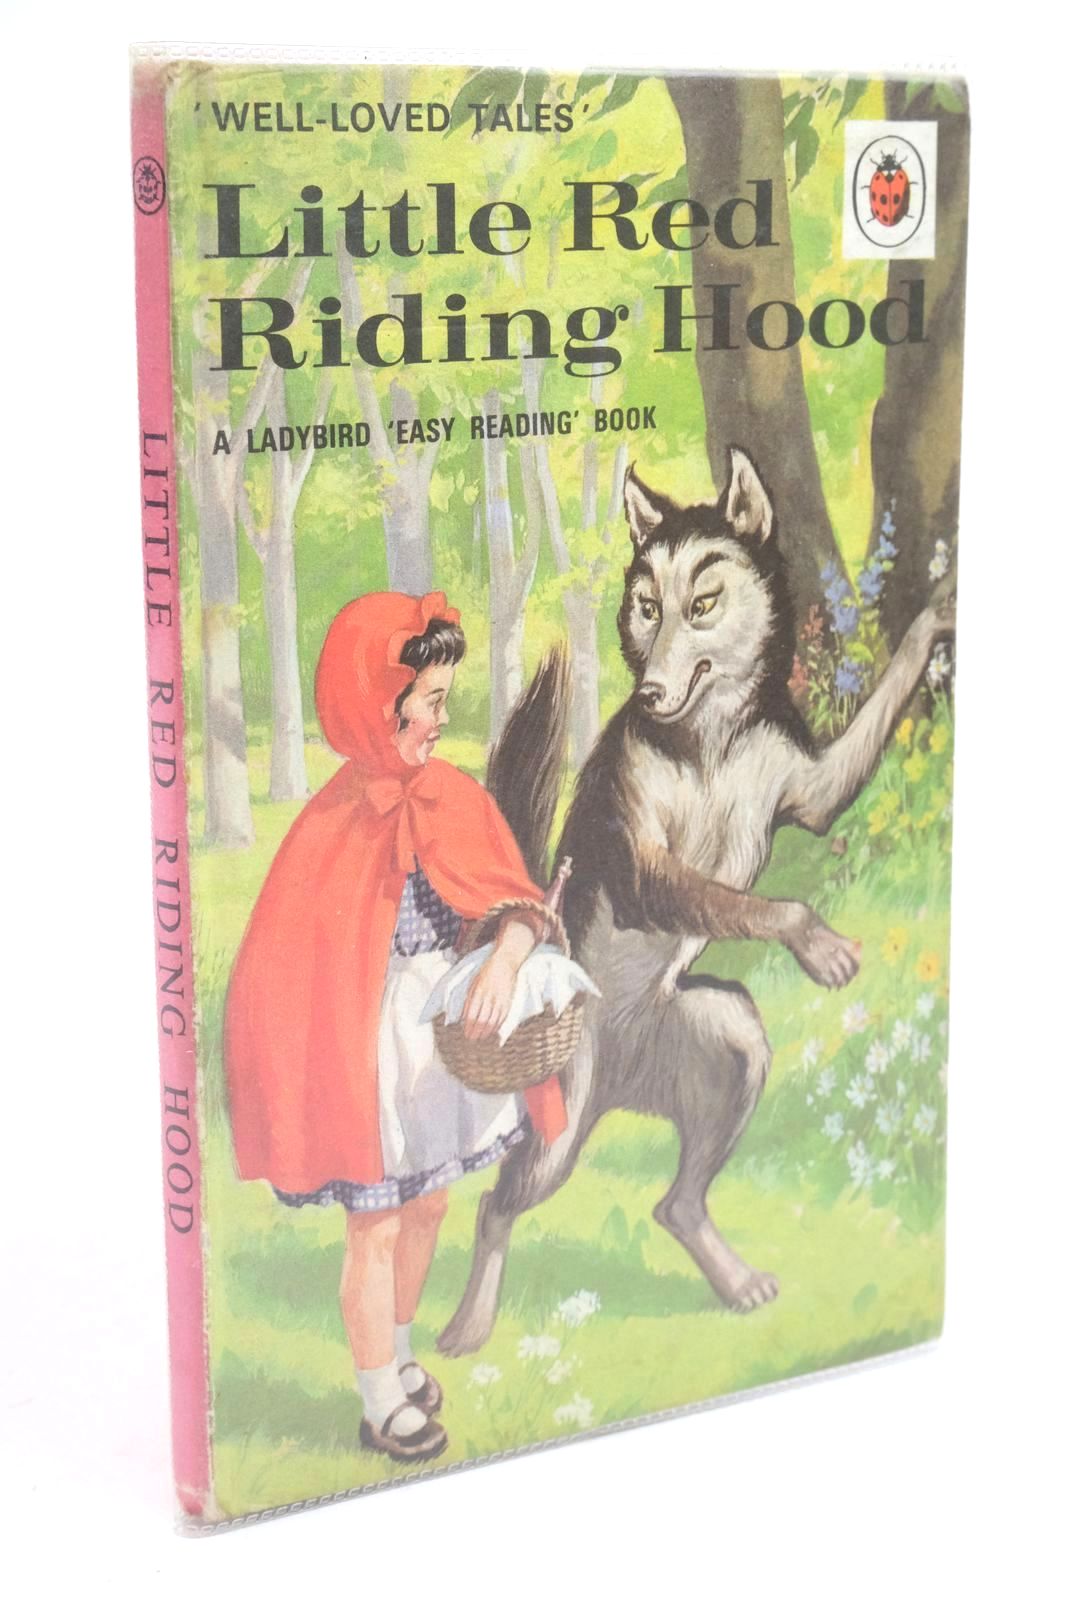 Photo of LITTLE RED RIDING HOOD written by Southgate, Vera illustrated by Winter, Eric published by Ladybird Books (STOCK CODE: 1322376)  for sale by Stella & Rose's Books